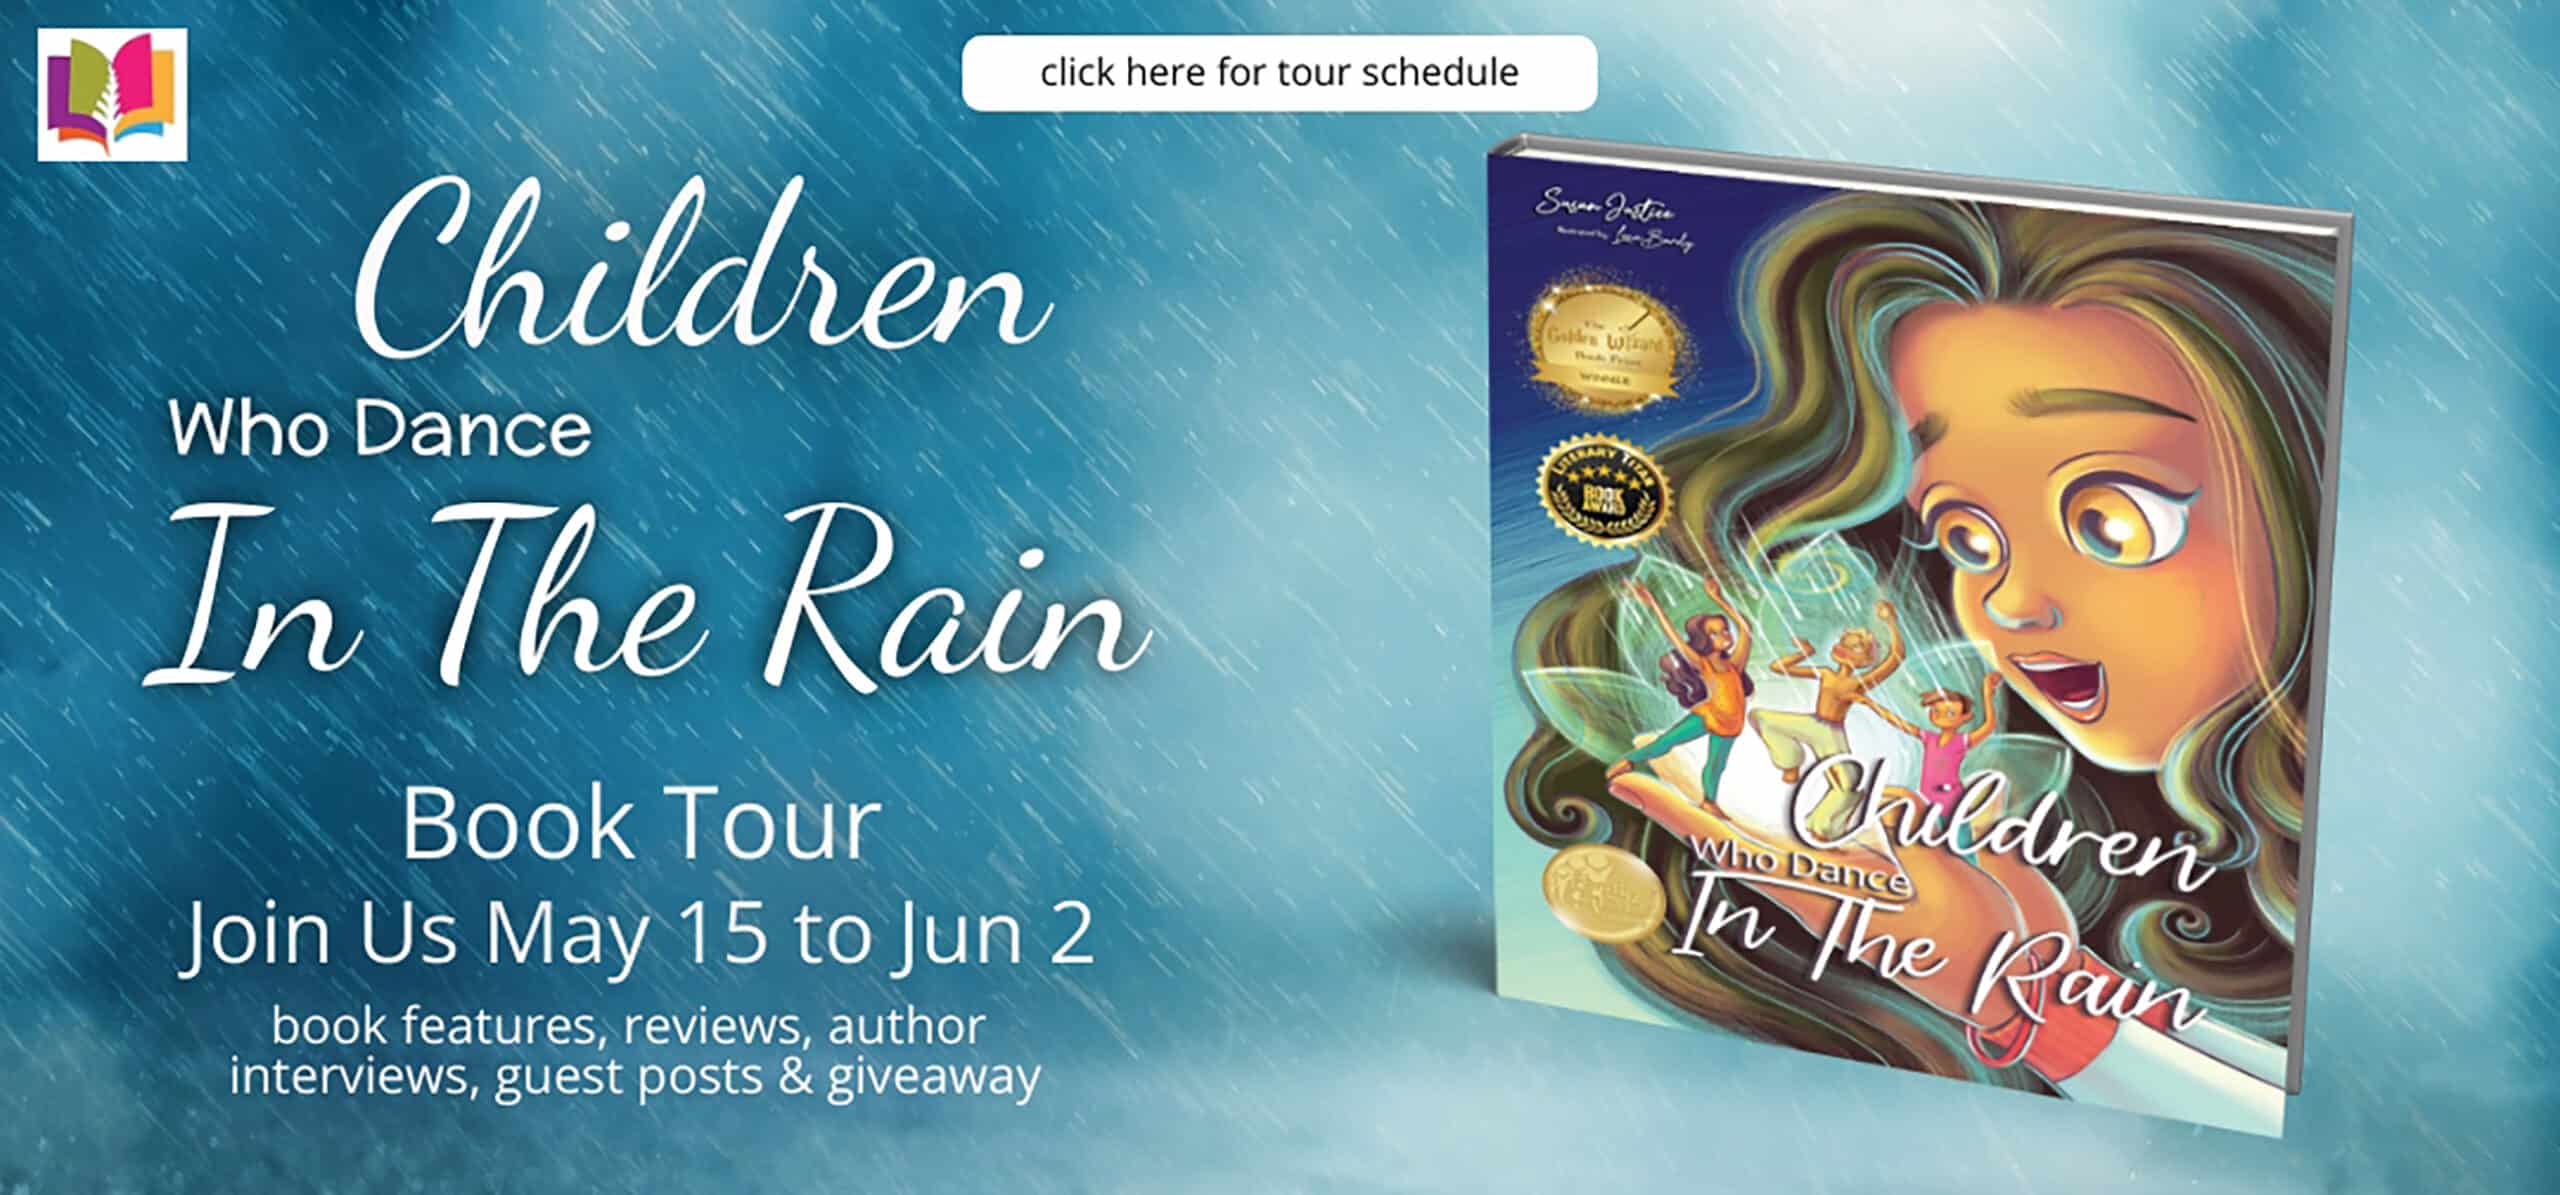 Children Who Dance in the Rain: A Children's Book About Kindness, Gratitude, and a Child's Determination to Change the World by Susan Justice | 5-Star Children's Book Review & Author Interview